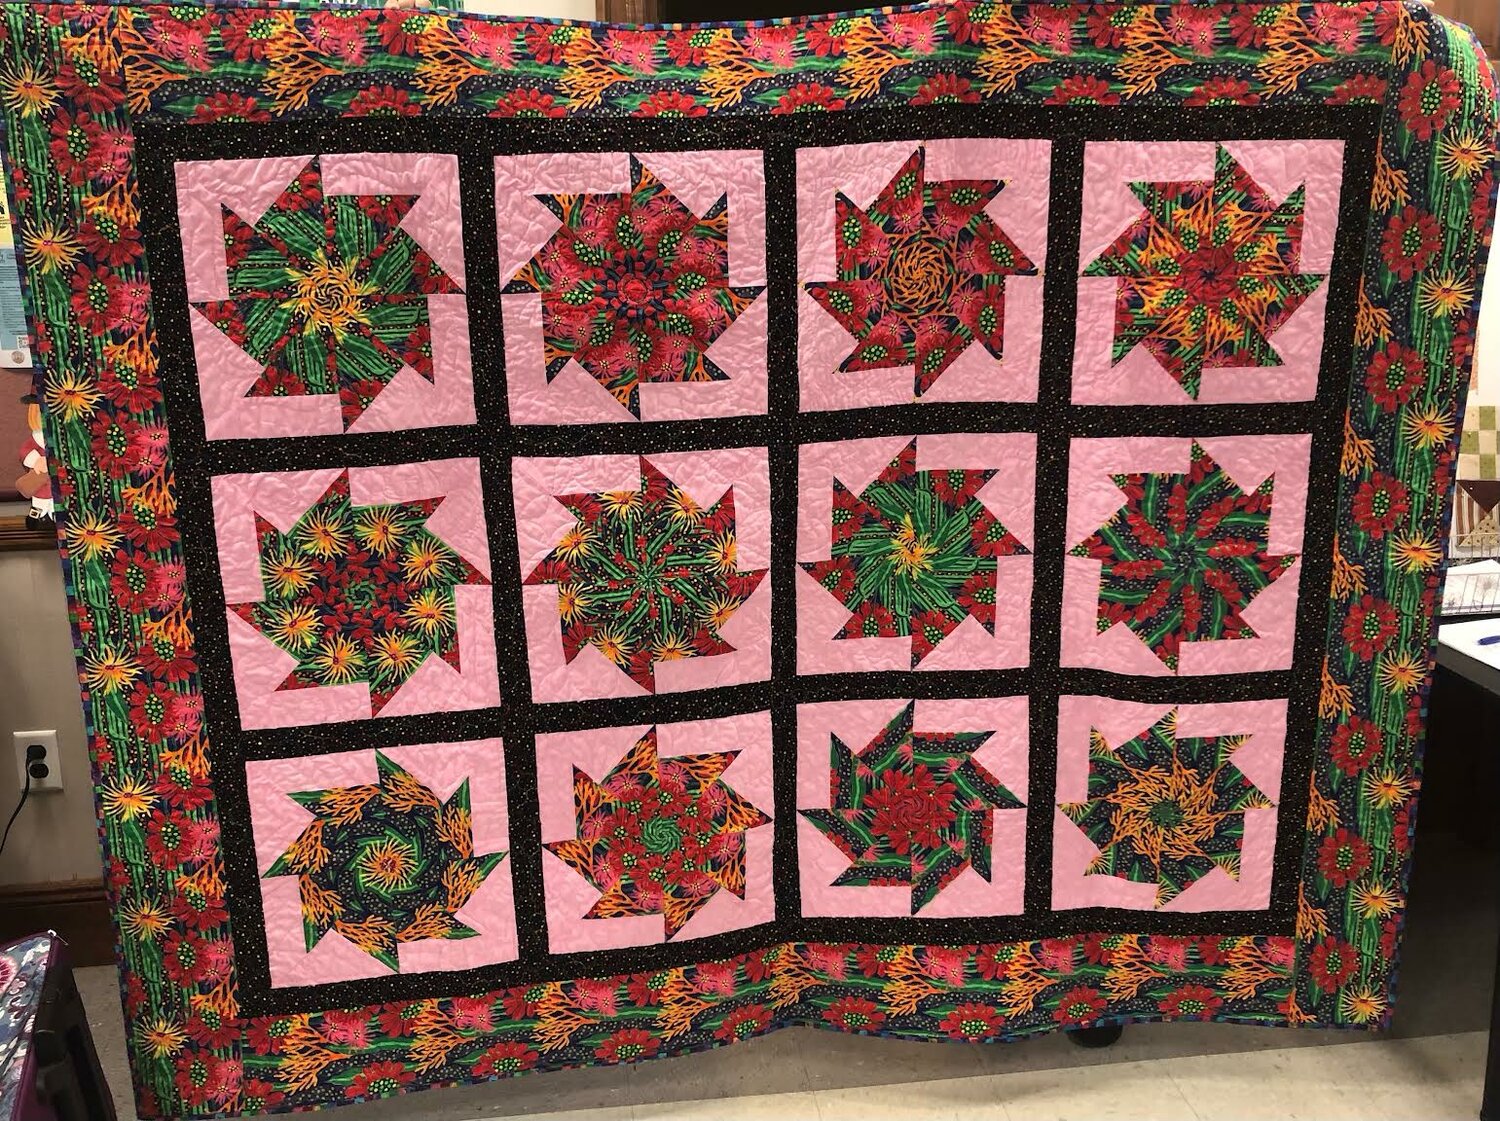 A photo of the quilt.